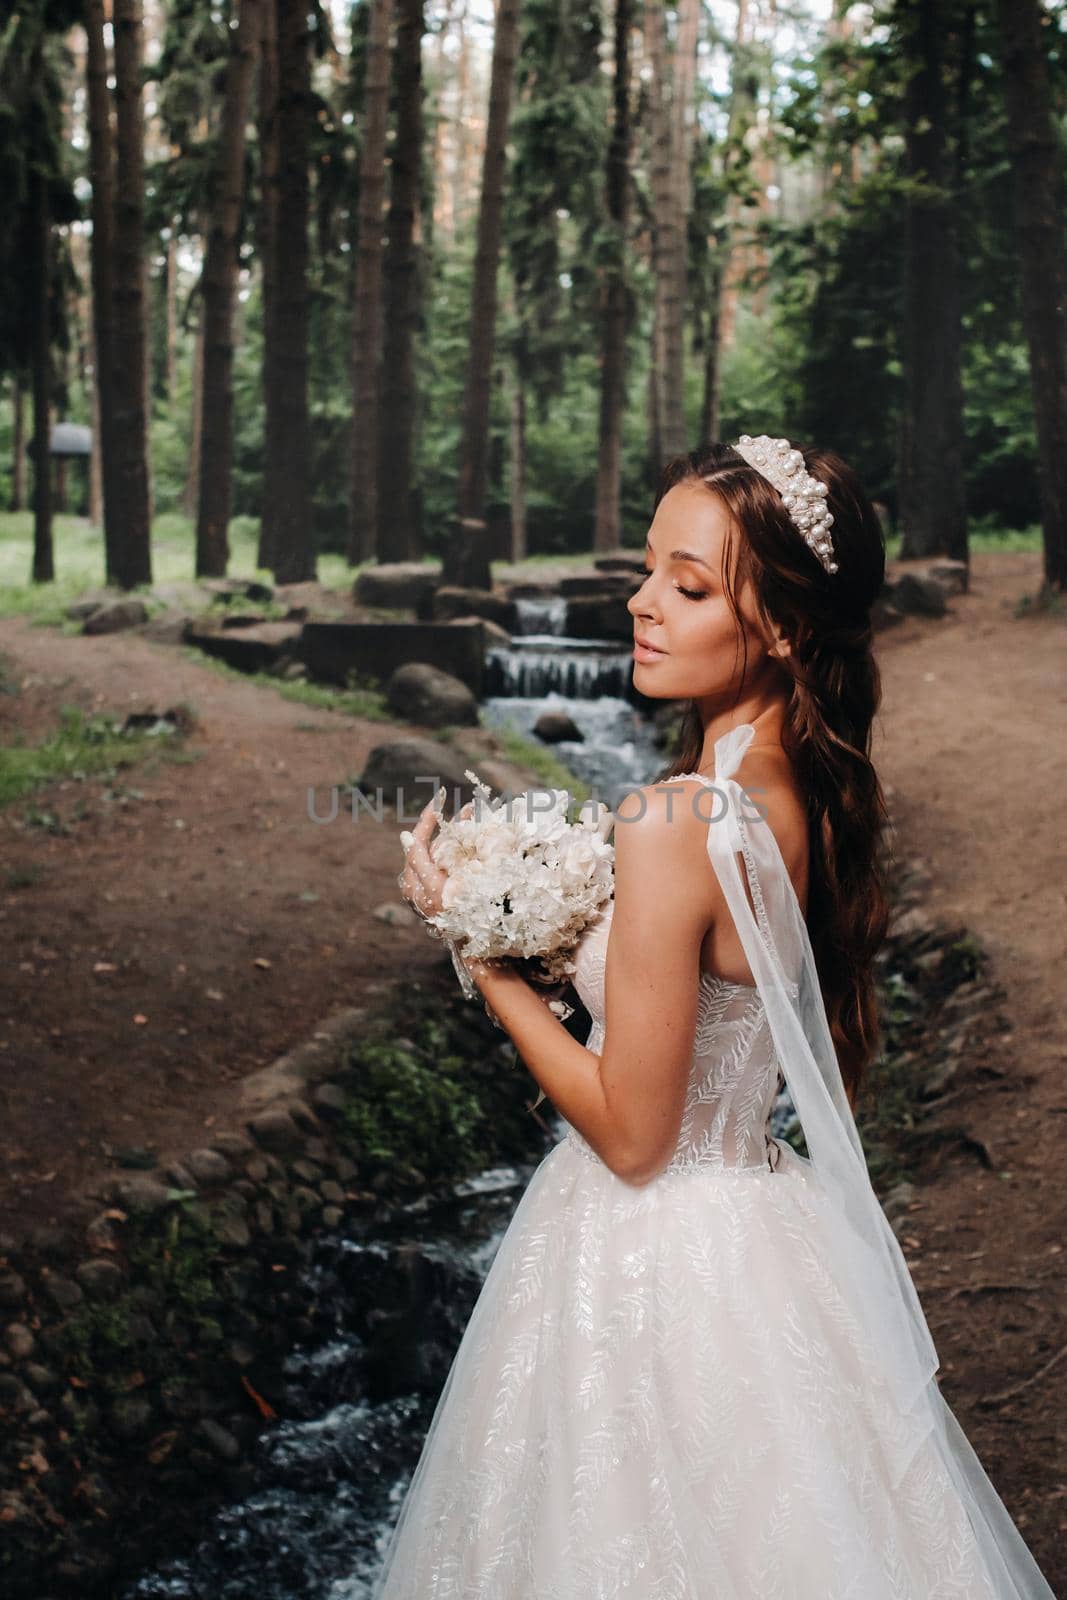 An elegant bride in a white dress and gloves holding a bouquet stands by a stream in the forest, enjoying nature.A model in a wedding dress and gloves in a nature Park.Belarus by Lobachad